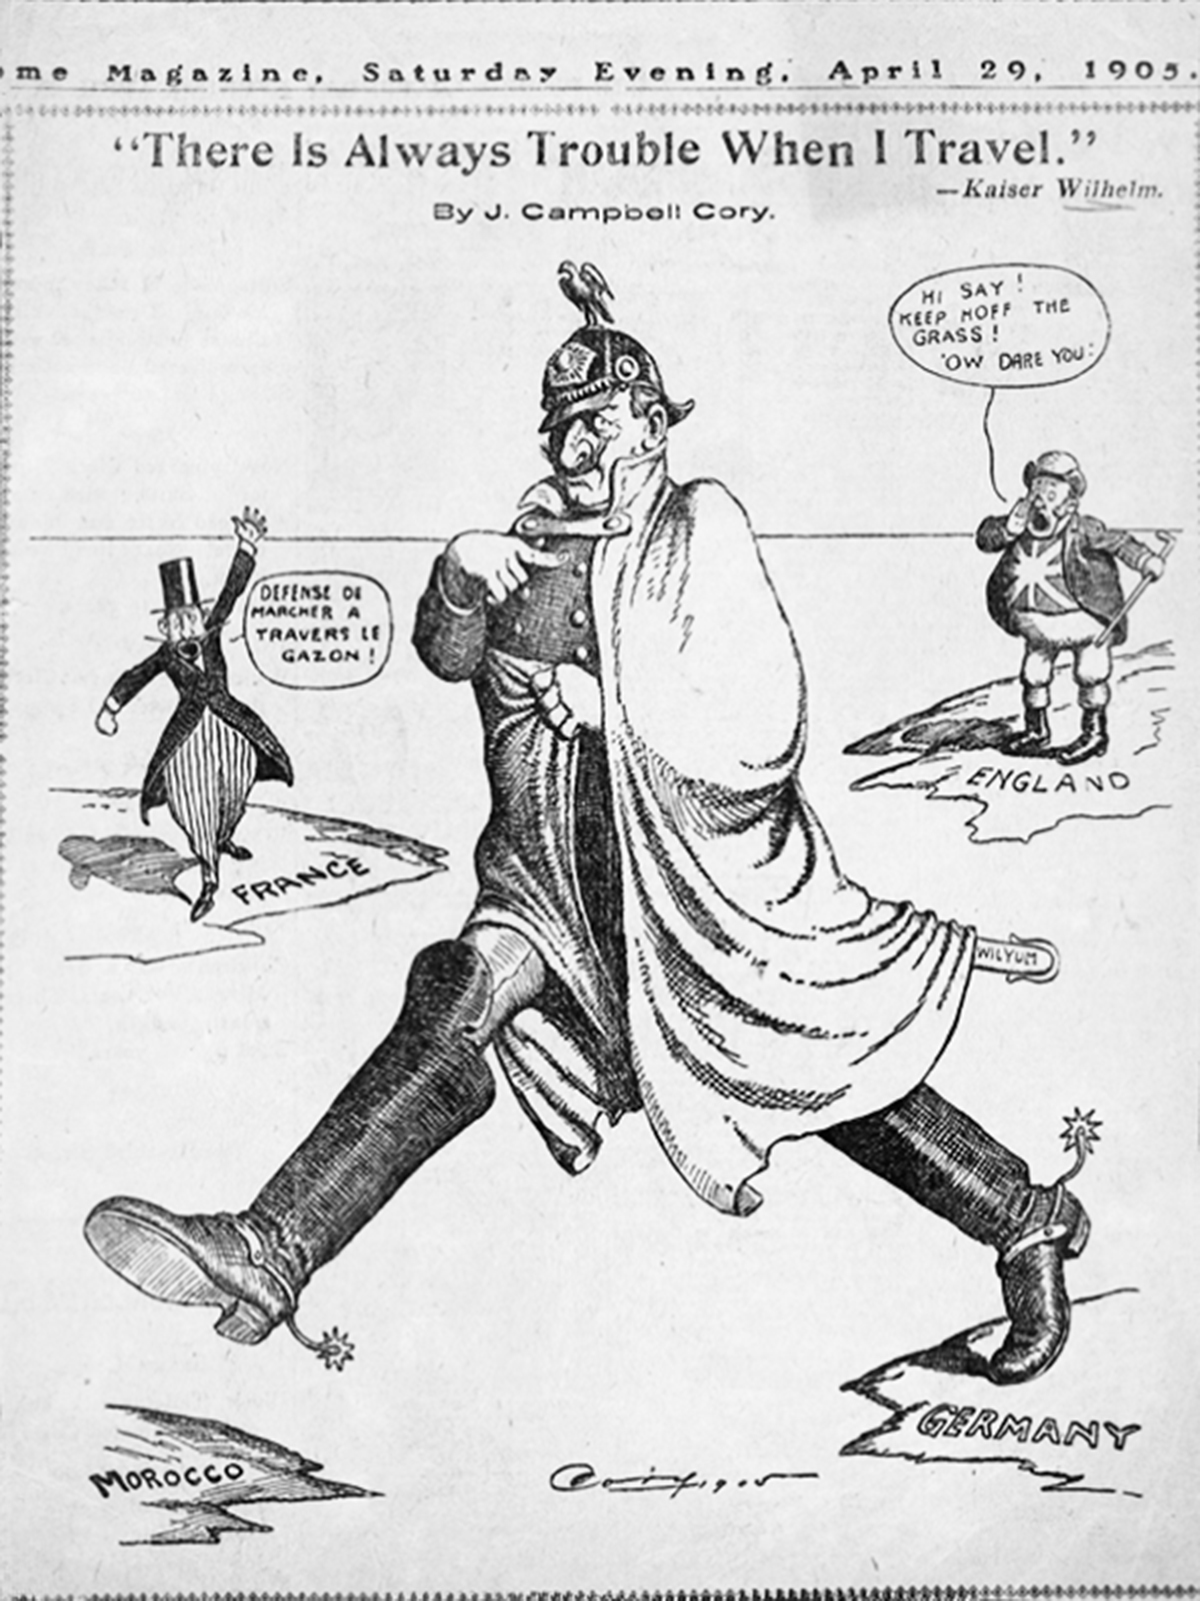 Cartoon depicts Kaiser Wilhelm II of Germany stepping from Germany to Morocco. England calls out "Hi say! Keep off the grass! 'How dare you!'" while France declares "Defense de marcher à travers le gazon!", Dated 29 April 1905